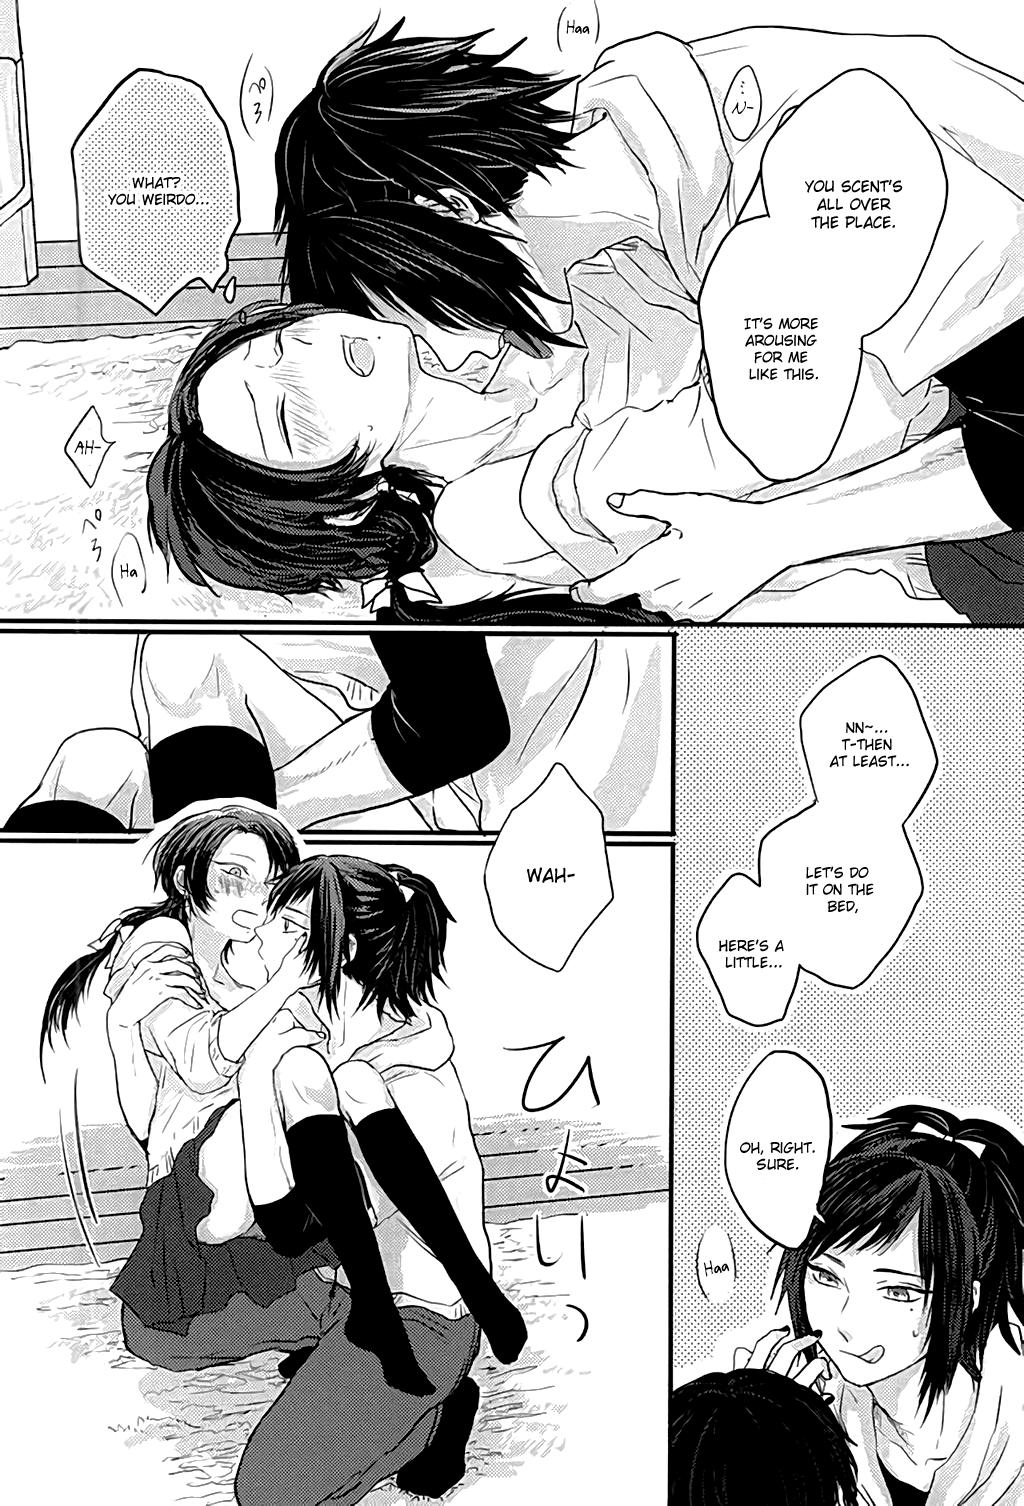 Tight After the strawberry - Touken ranbu Viet Nam - Page 9